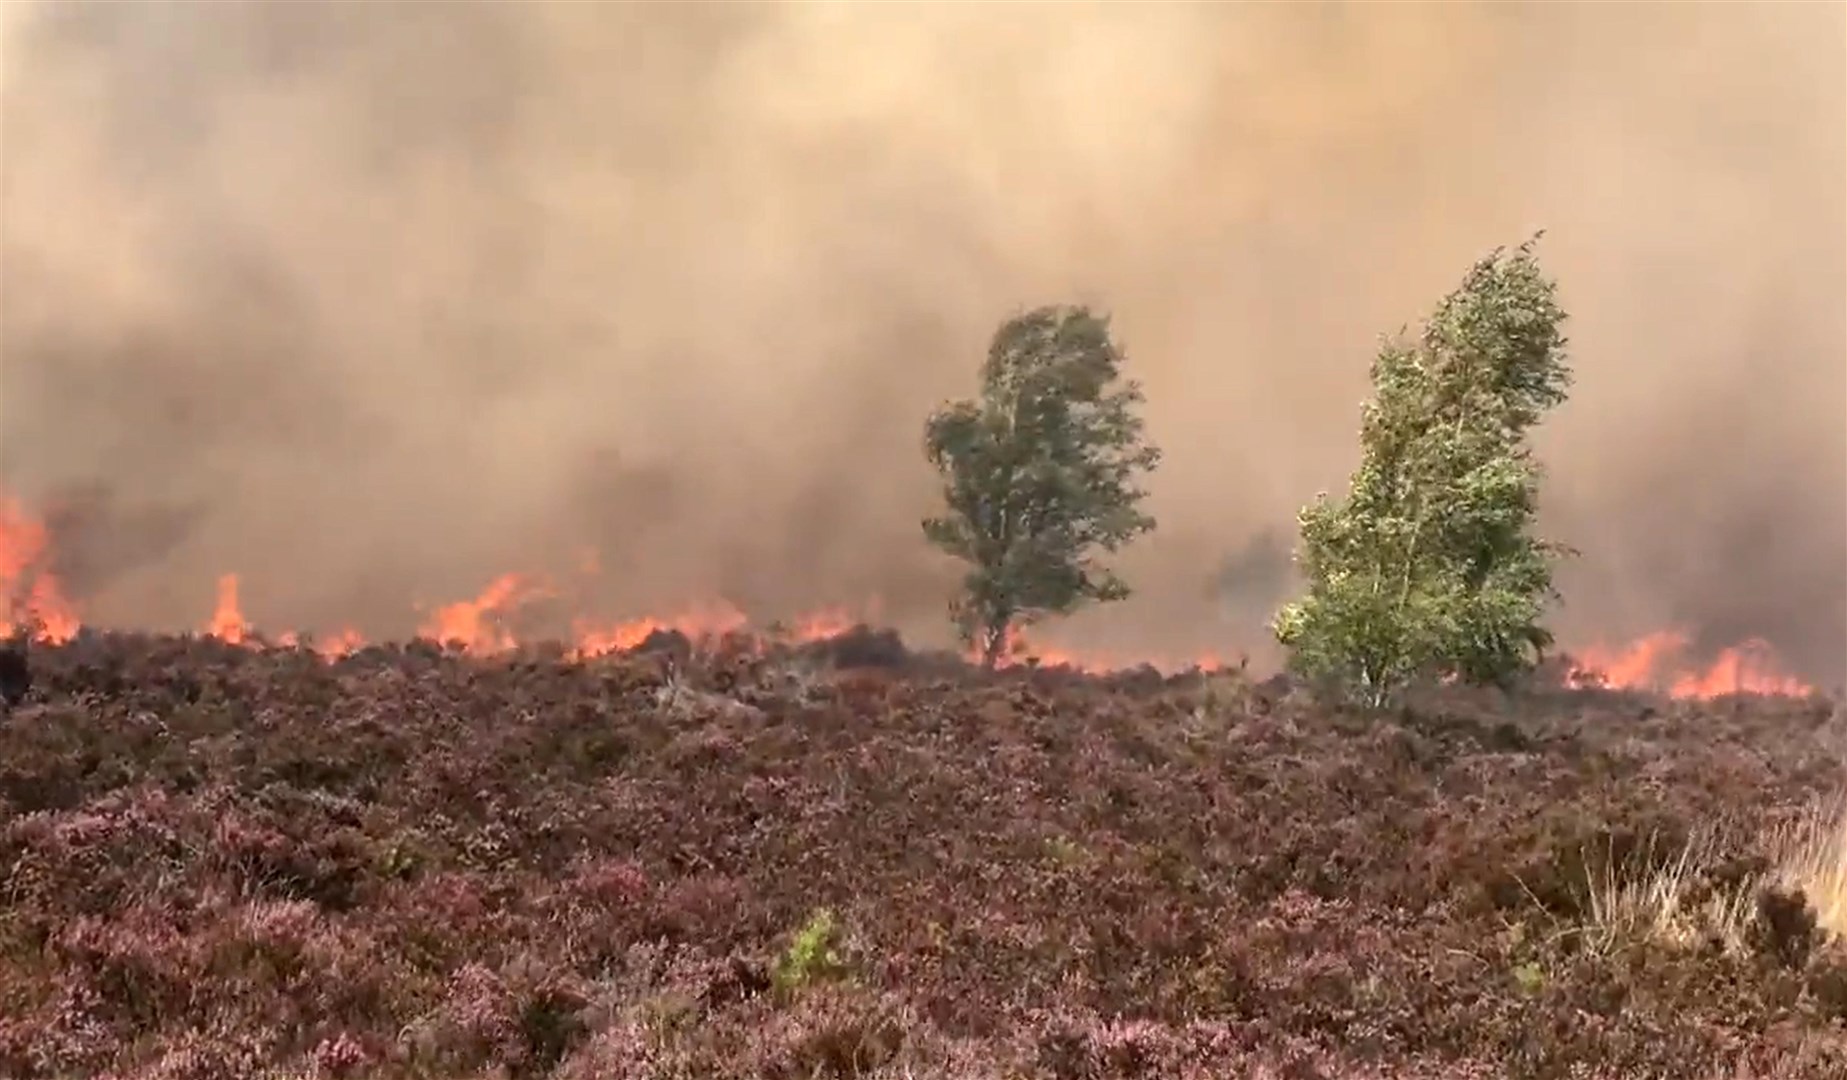 The blaze at Hankley Common in Surrey (Alan Johnson/Twitter/PA)